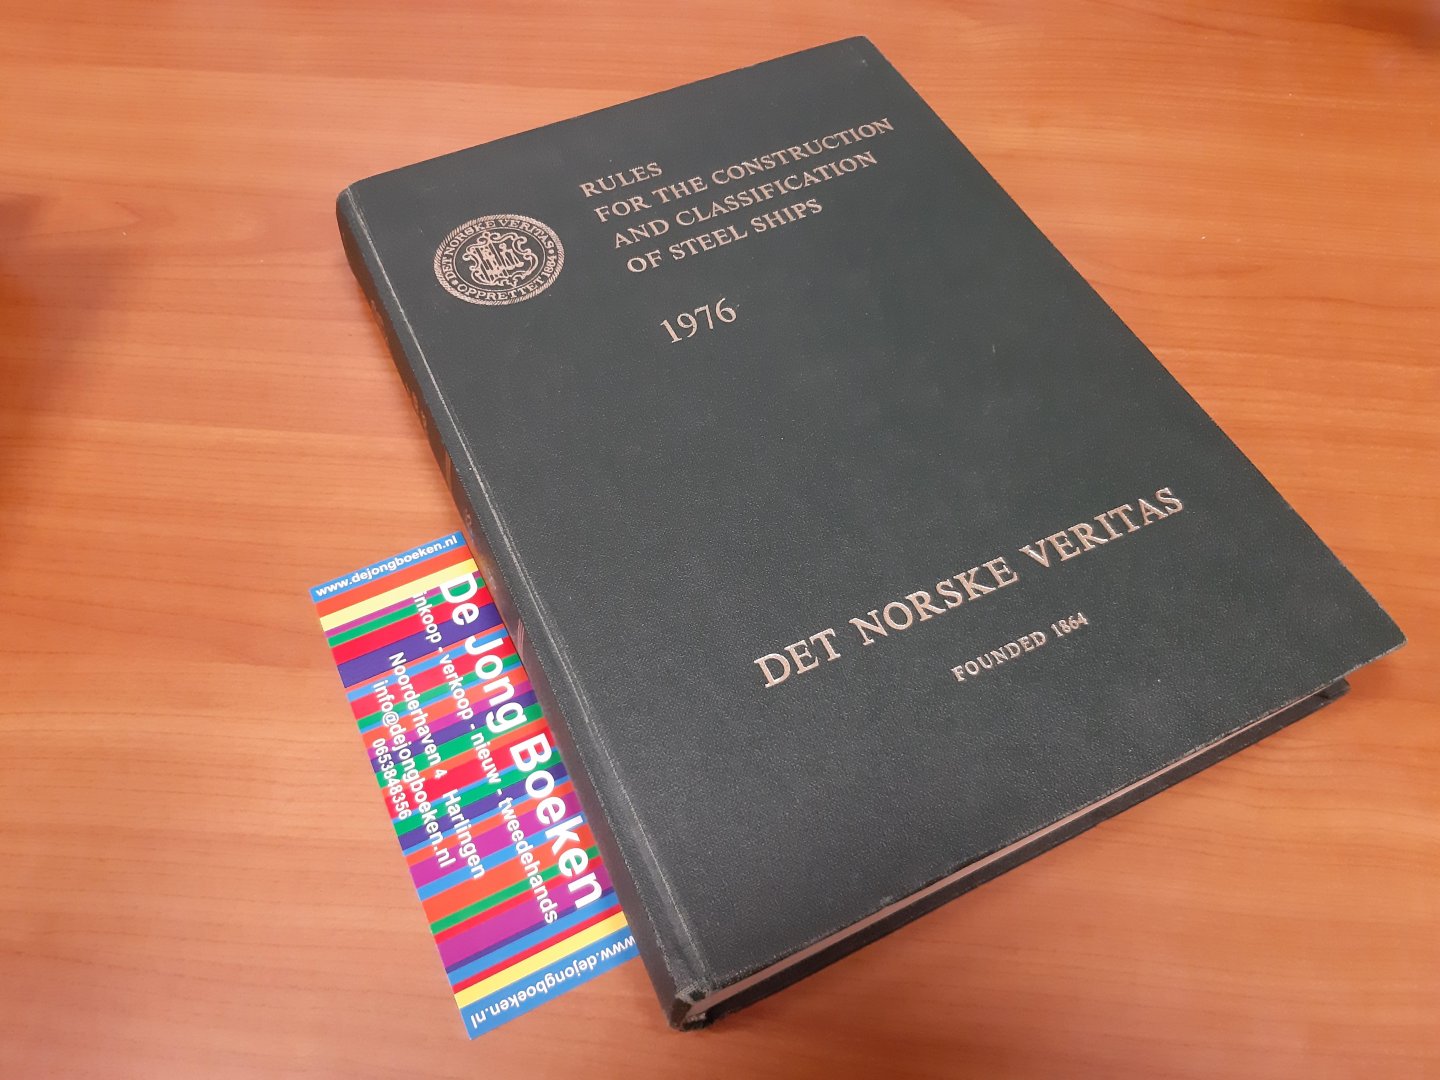  - Rules for the Construction and Classification of Steel Ships Rules 1976 DET NORSKE VERITAS